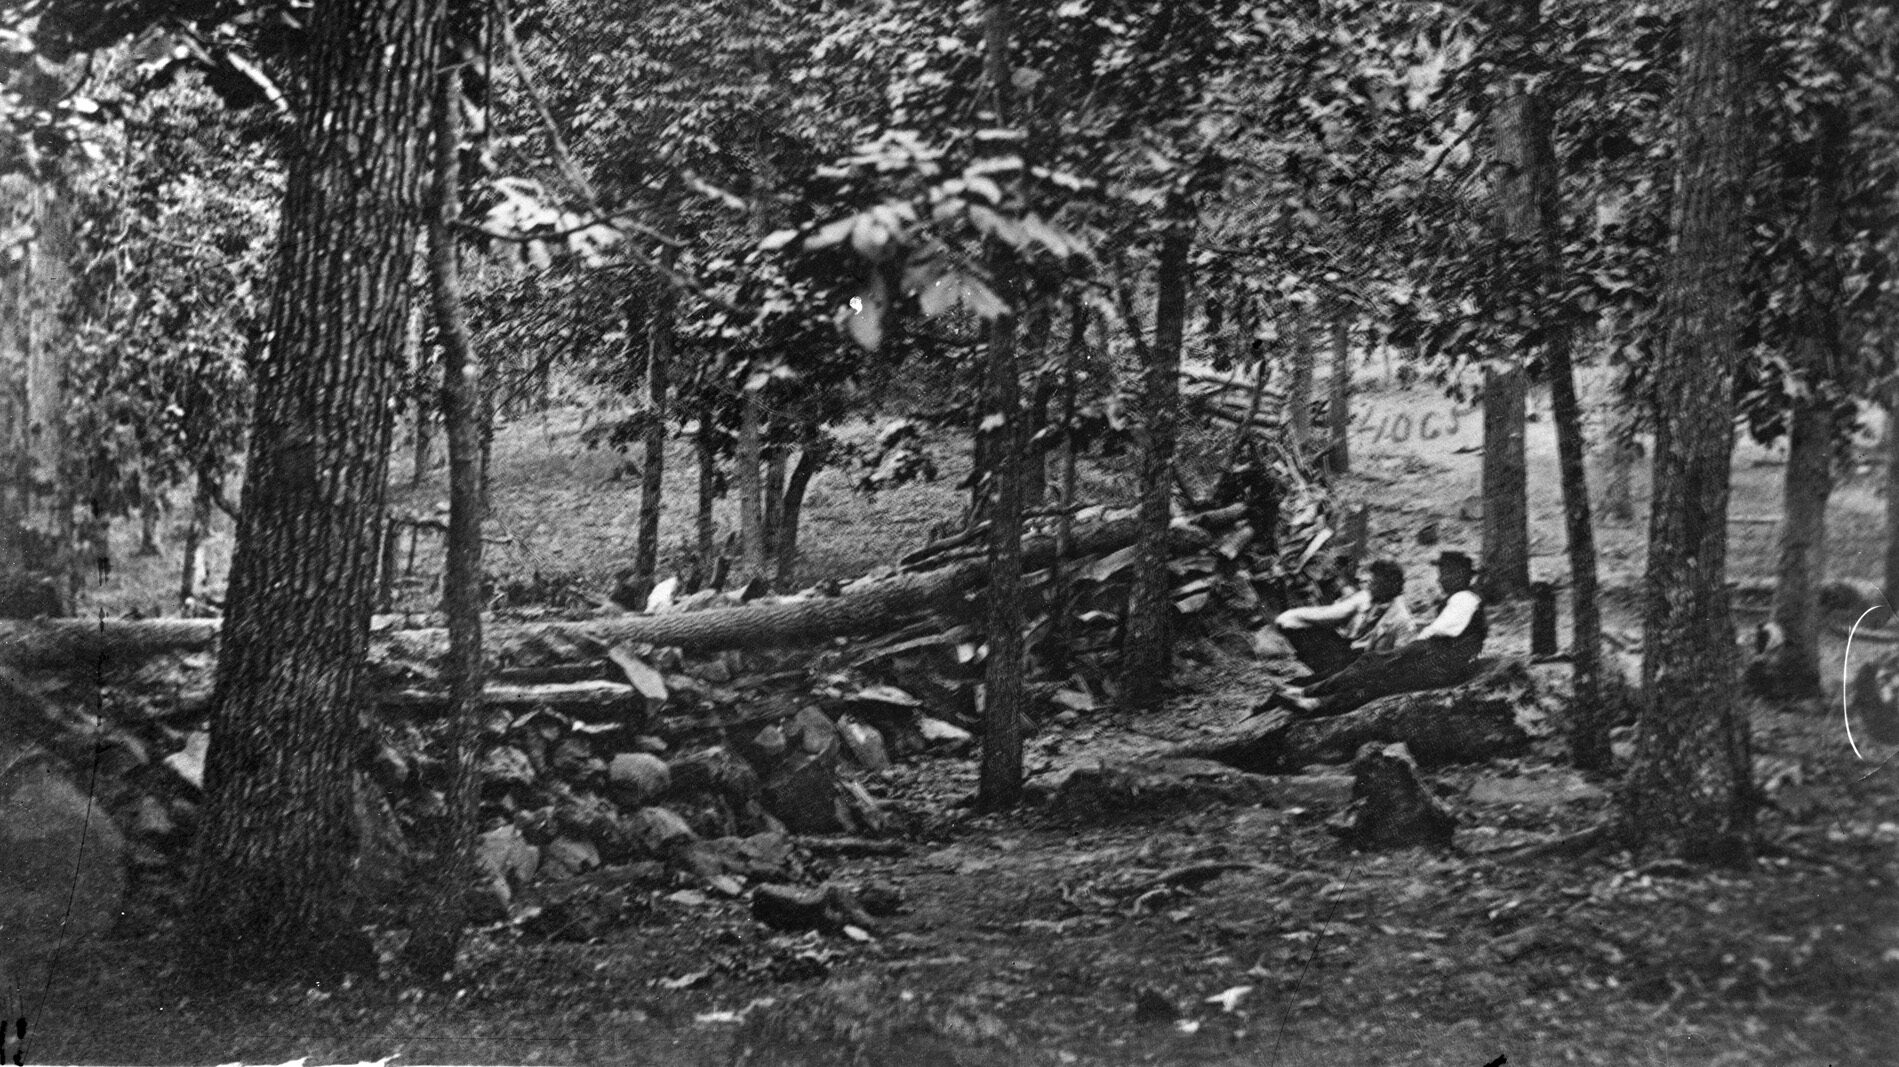 A photo taken after the battle testifies to the strength of the Union position atop Culp’s Hill. The Yankees used rocks and logs to construct formidable breastworks.